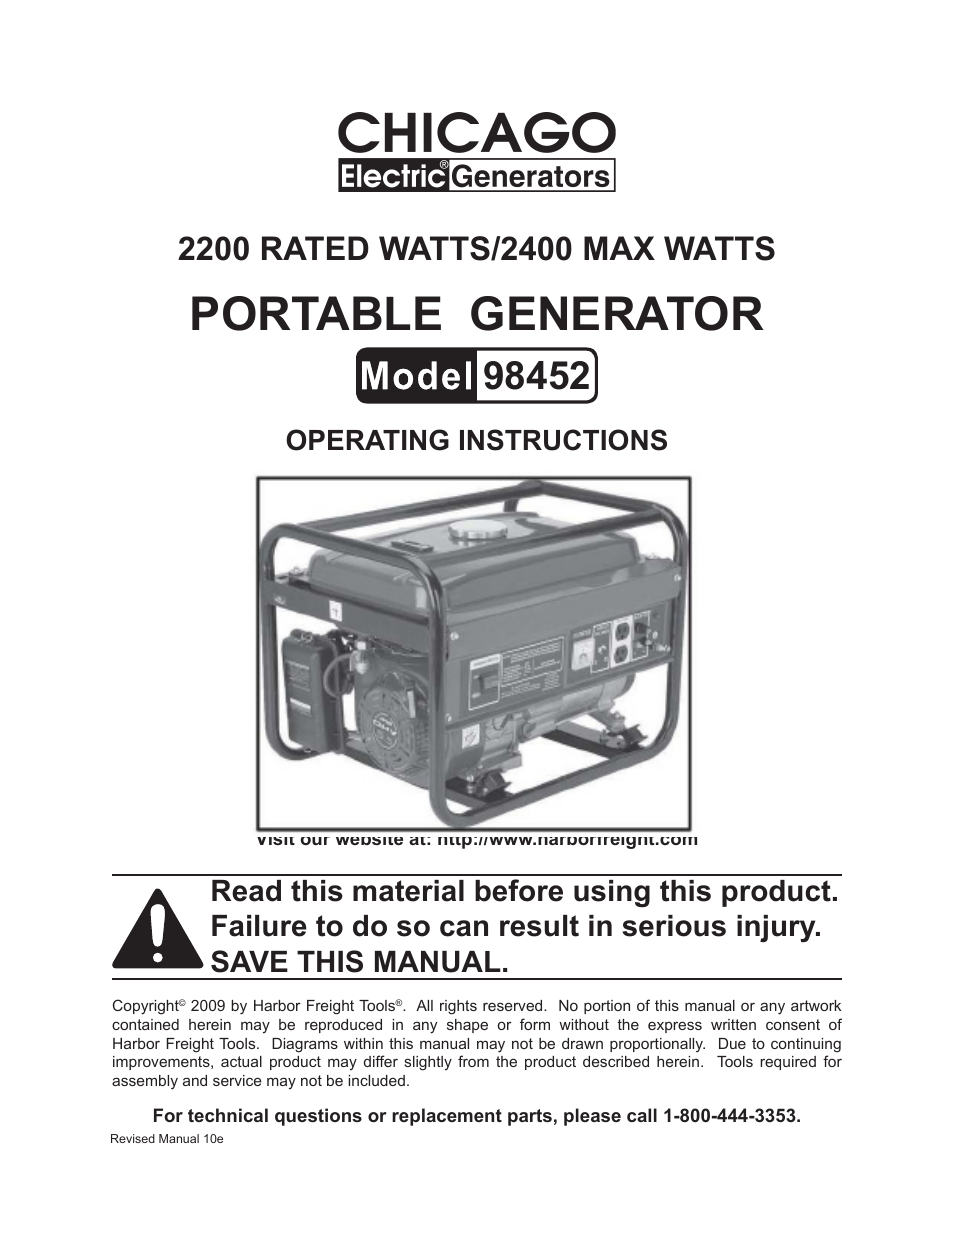 Chicago Electric PORTABLE GENERATOR 98452 User Manual | 25 pages